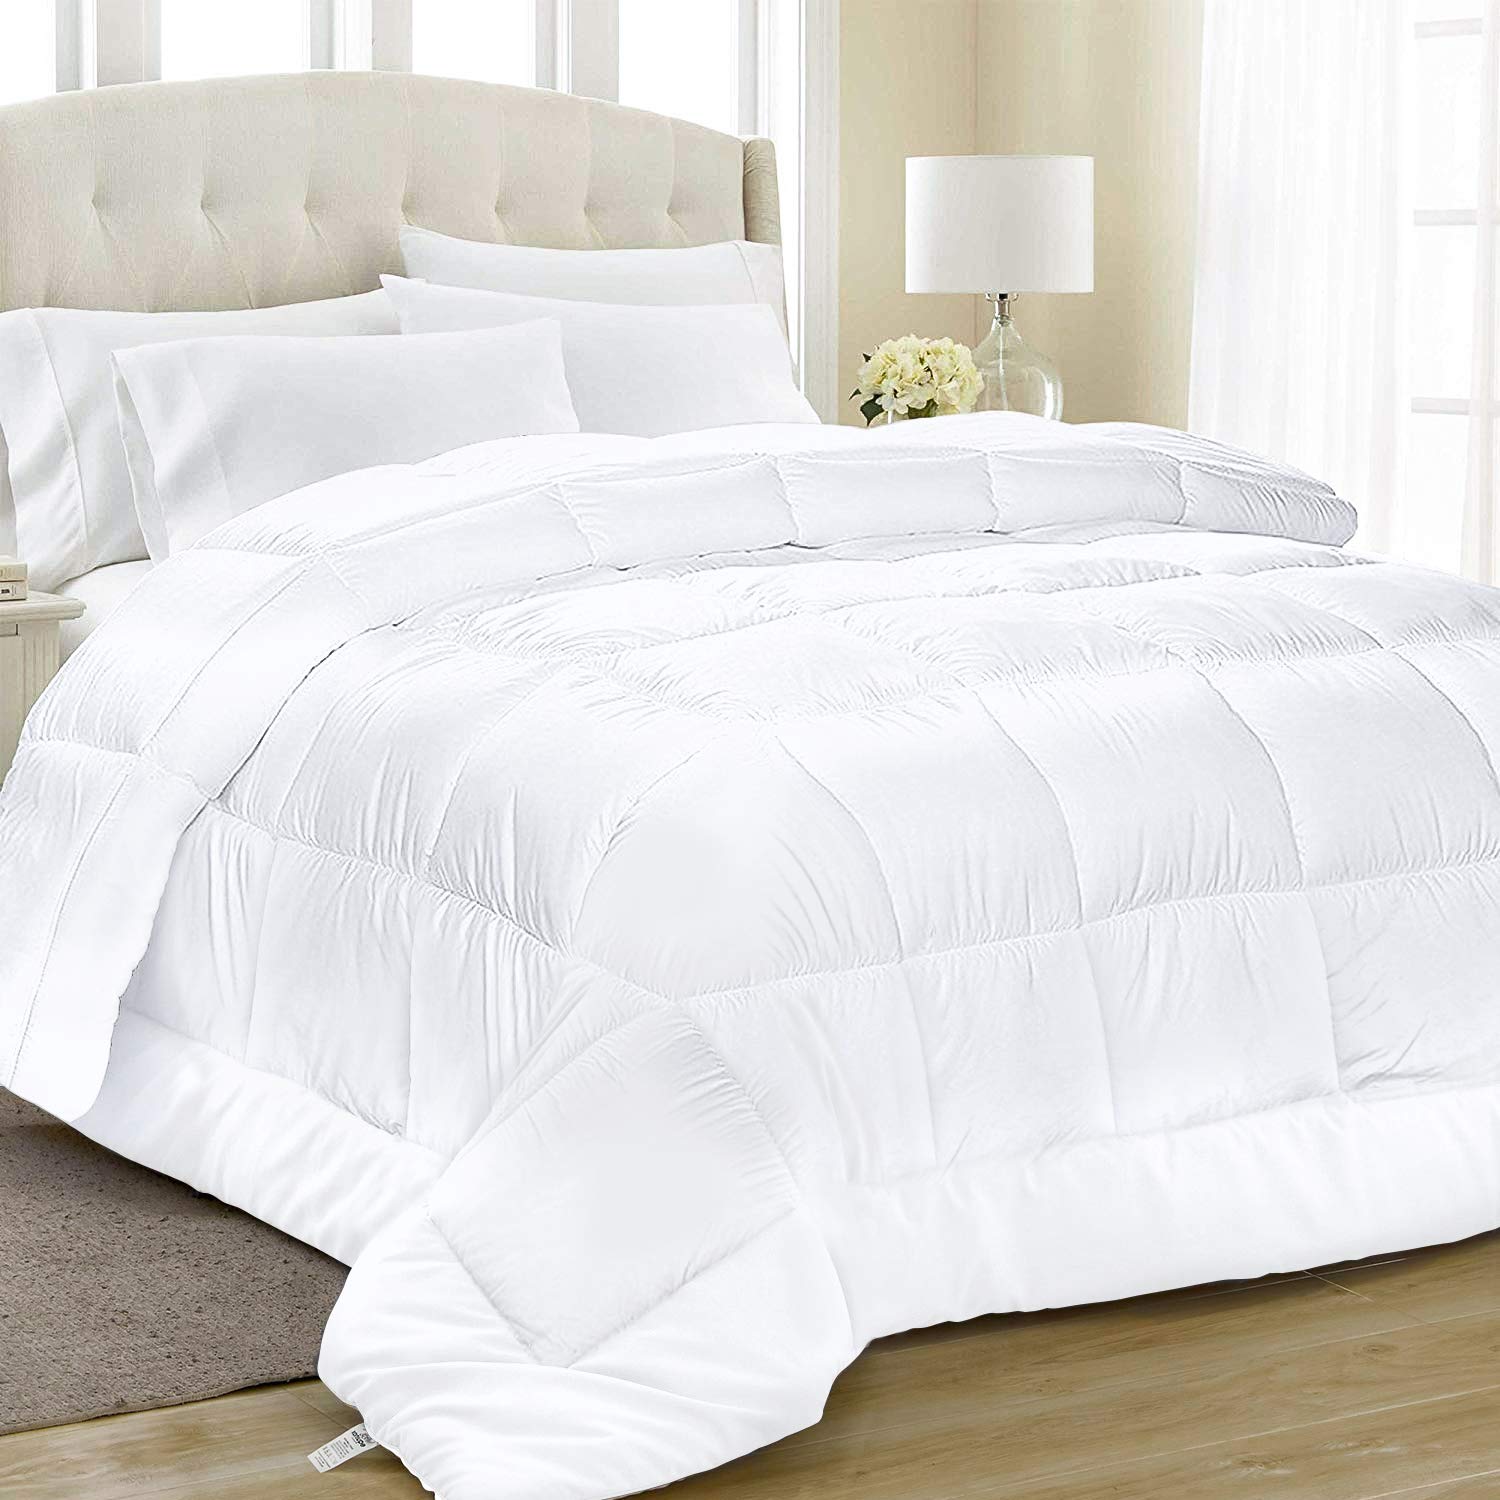 Equinox All Season Quilted Comforter